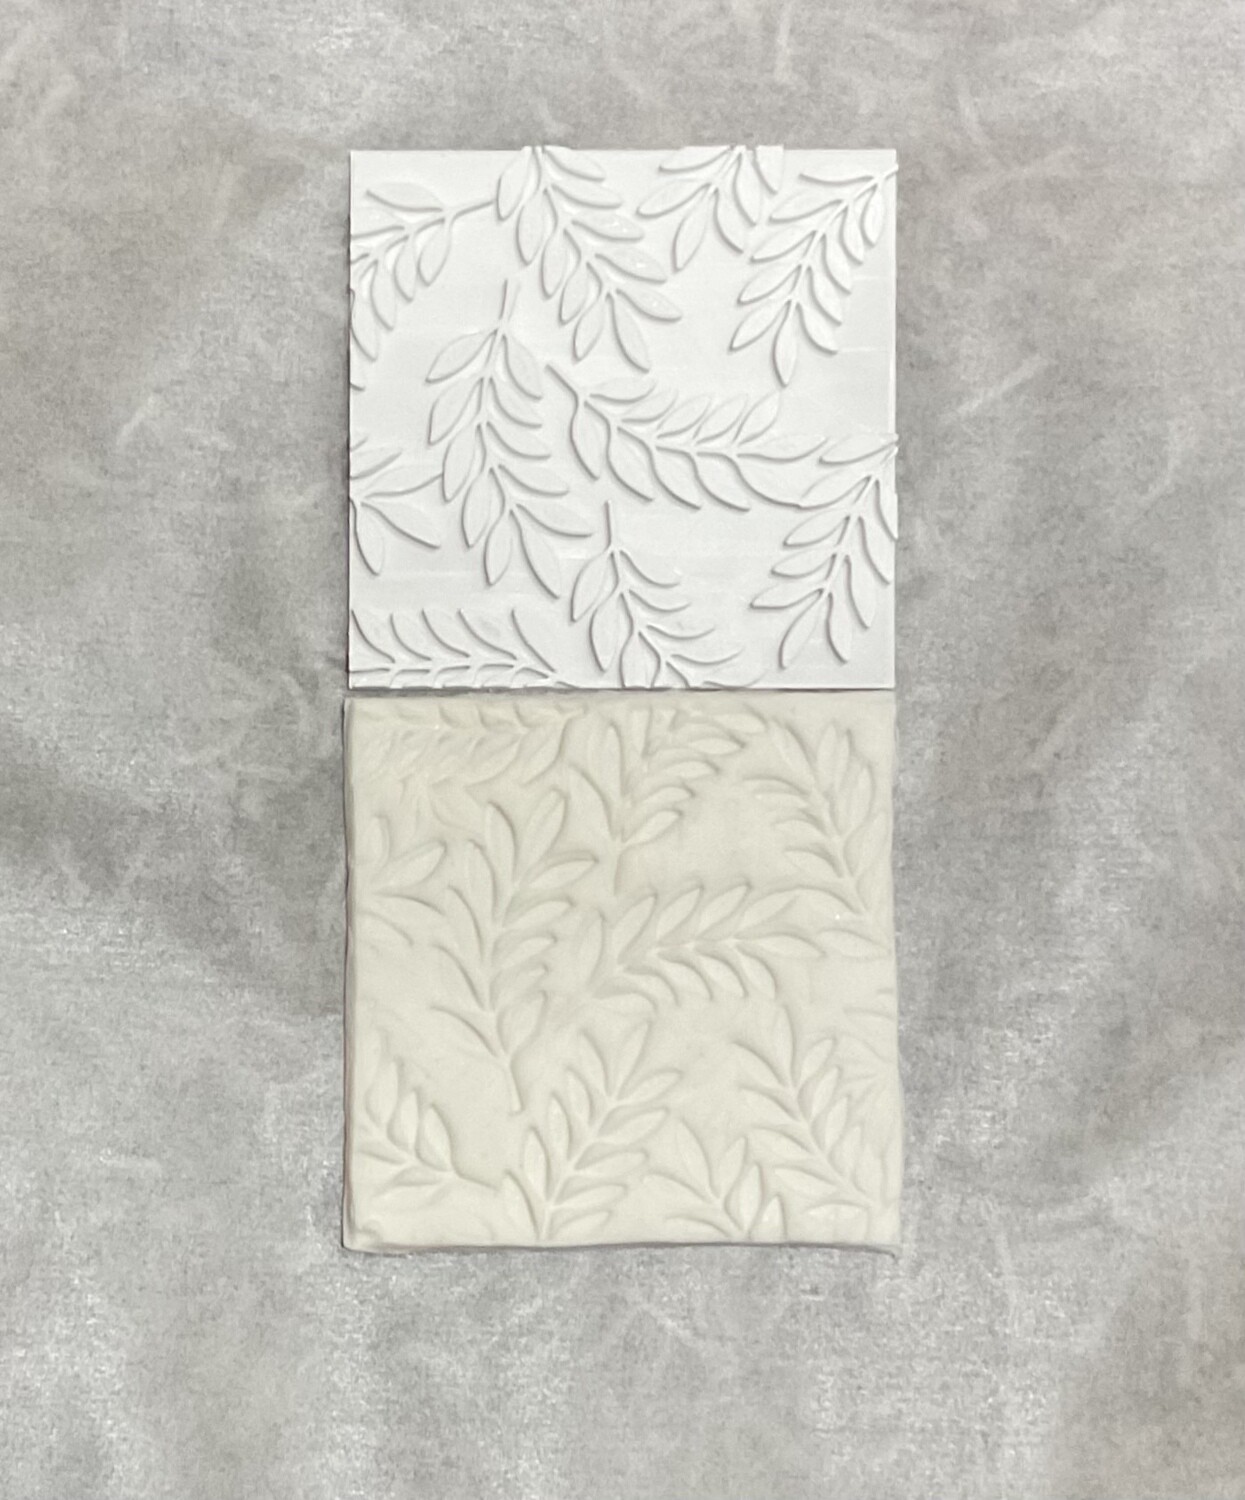 Lots of Leaves Textured stamp